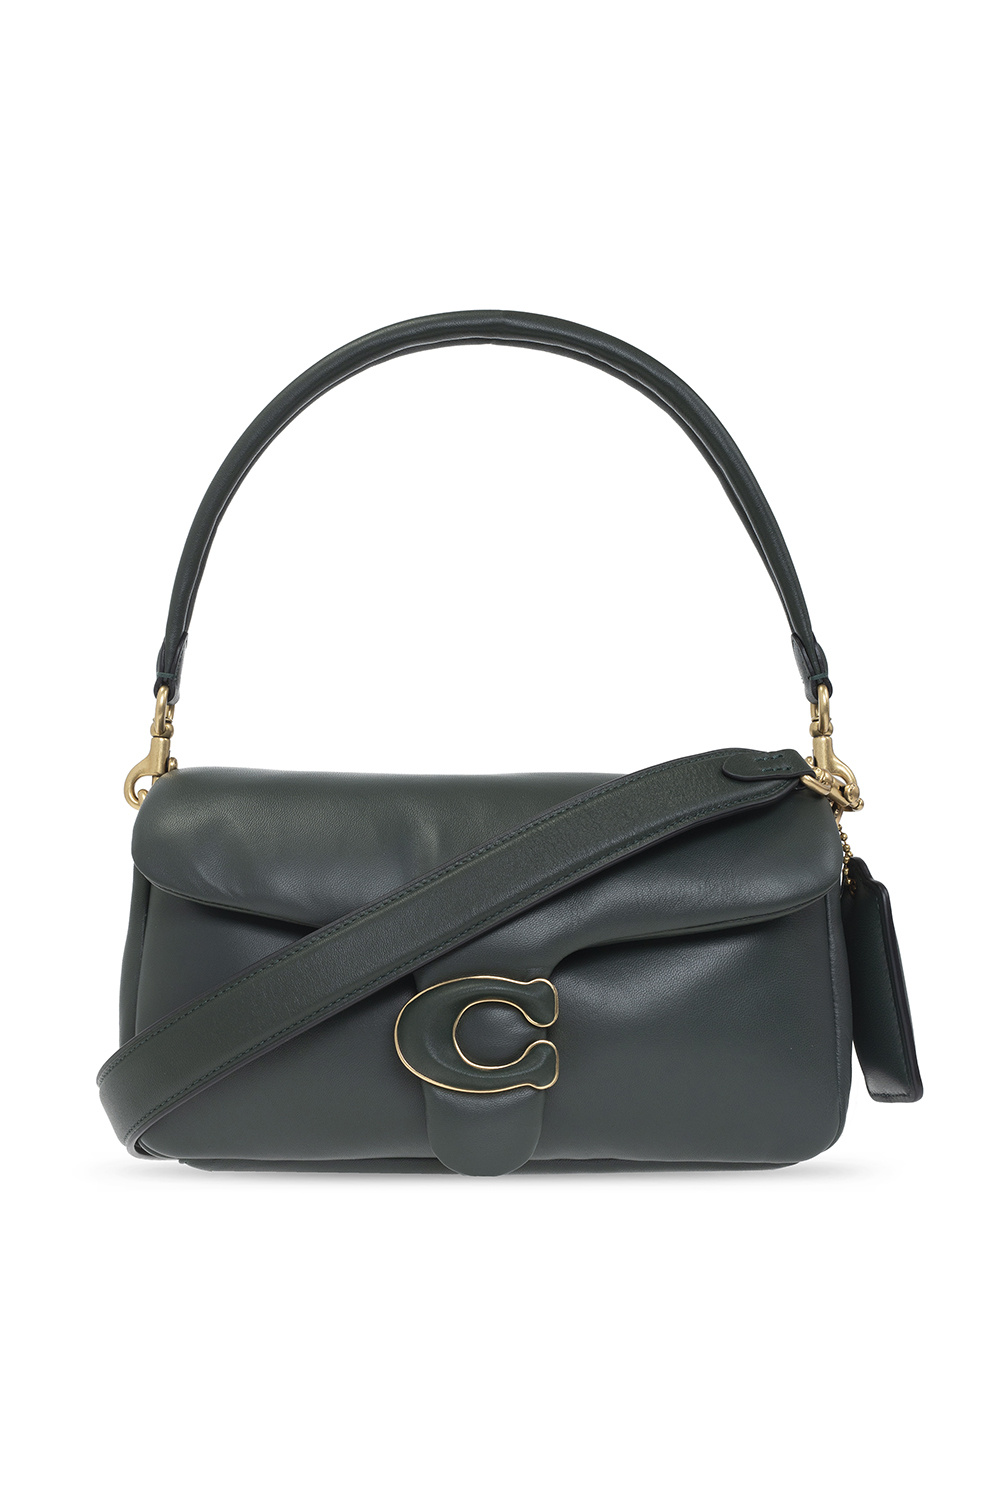 COACH Pillow Tabby Small Leather Shoulder Bag